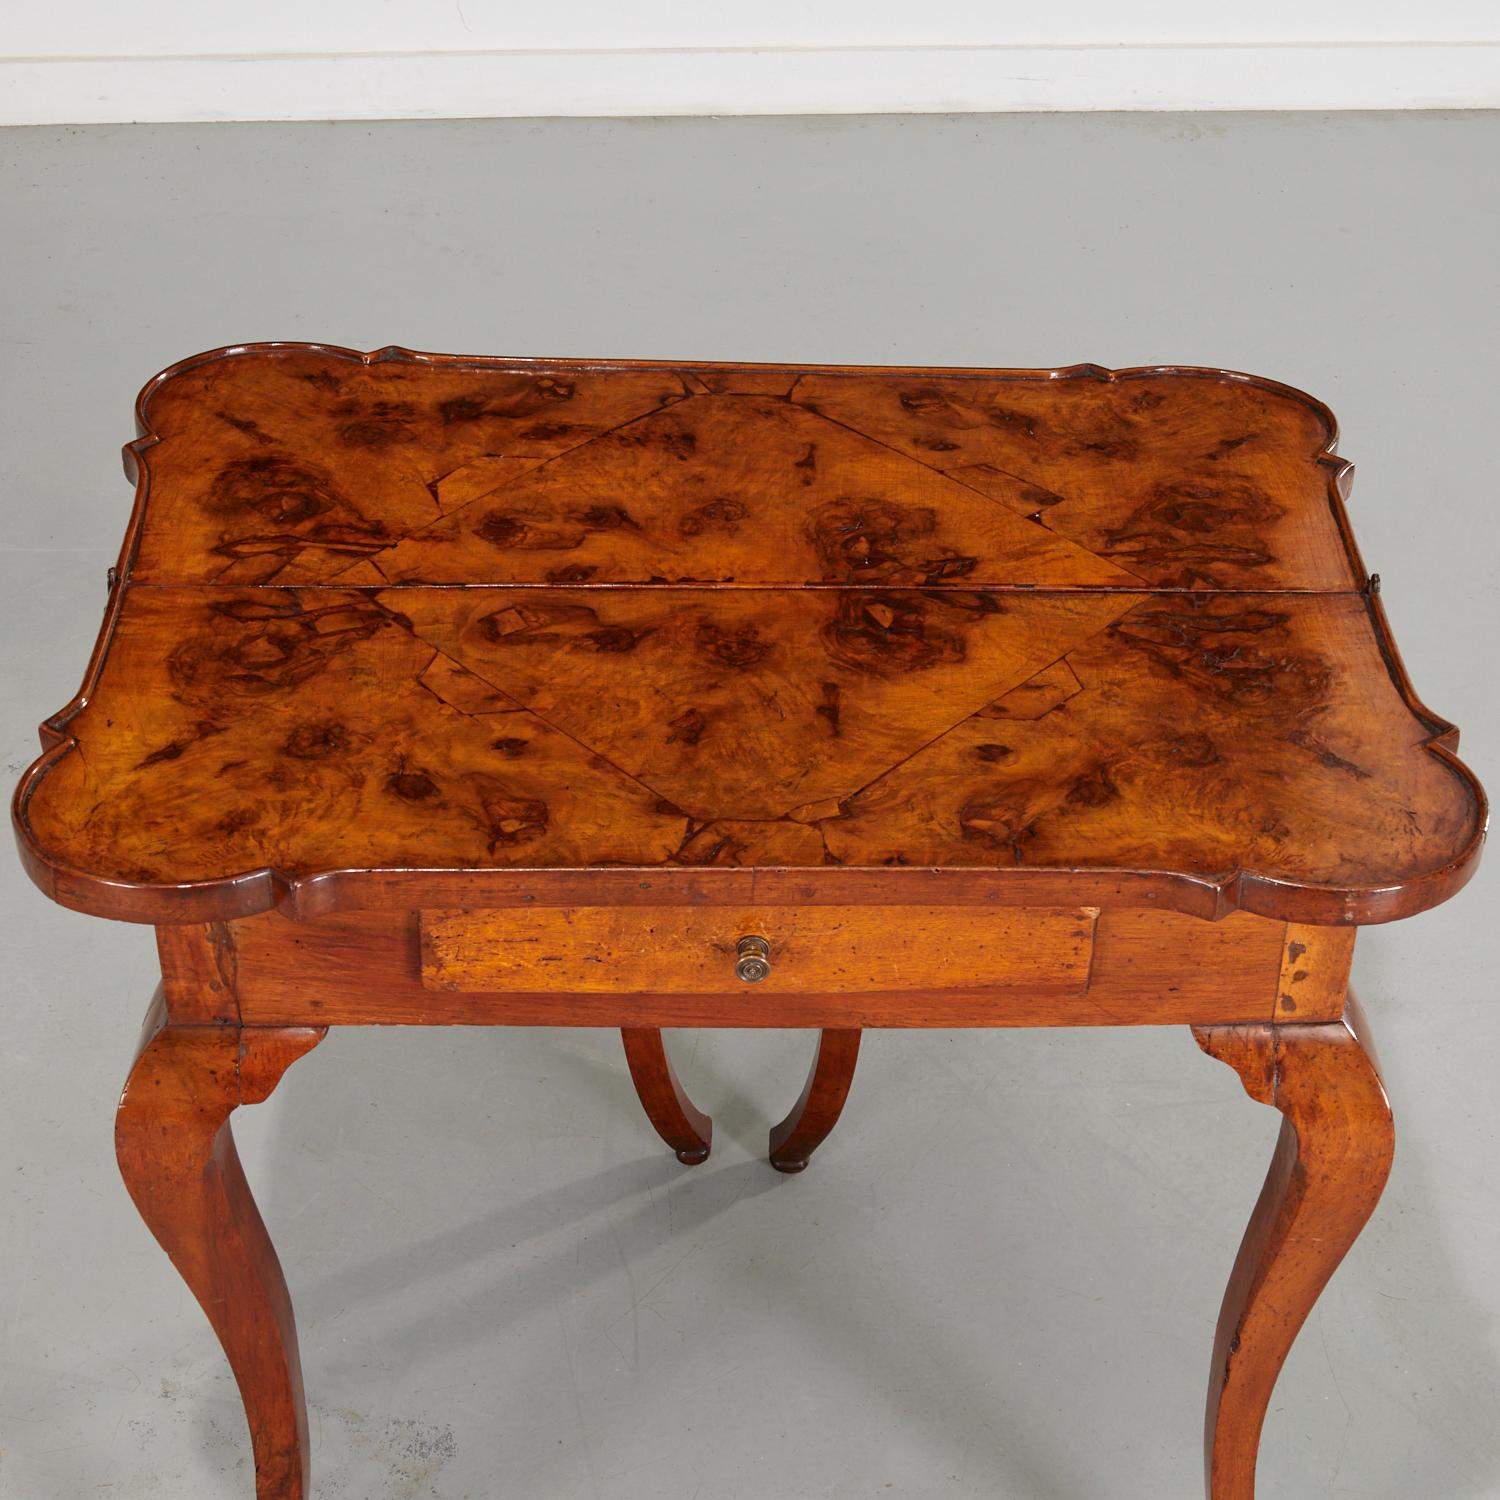 Georgian 19th C. Circassian Walnut Games Table with Bookmatched Burl Wood Top For Sale